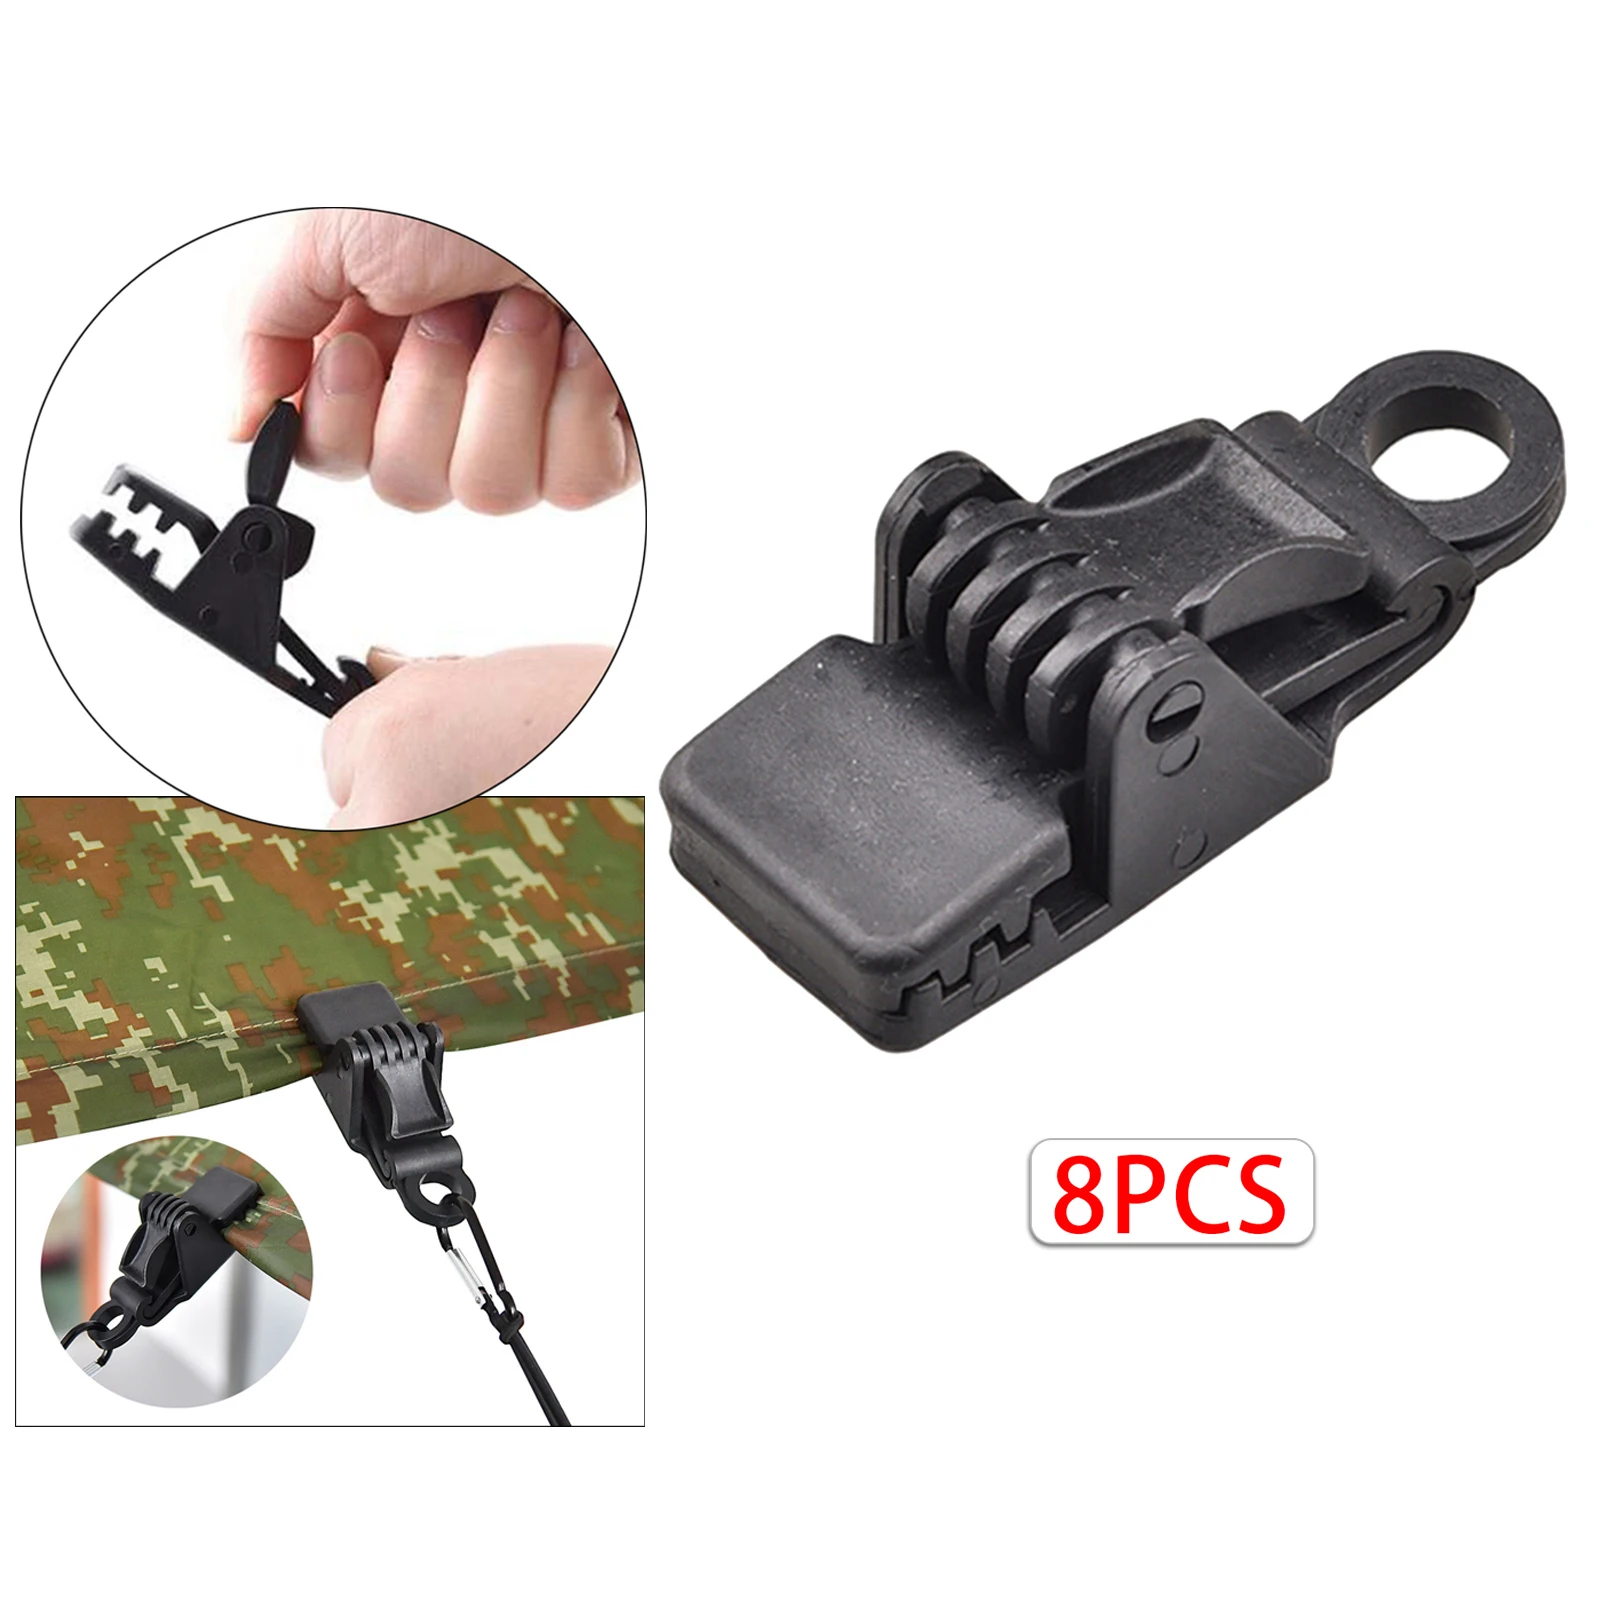 8Pcs Outdoor Tarp Clamp Awning Tent Canopy Clamp Camping Survival Emergency Tighten Tool Tarpaulin Clip Snap Tent Accessories